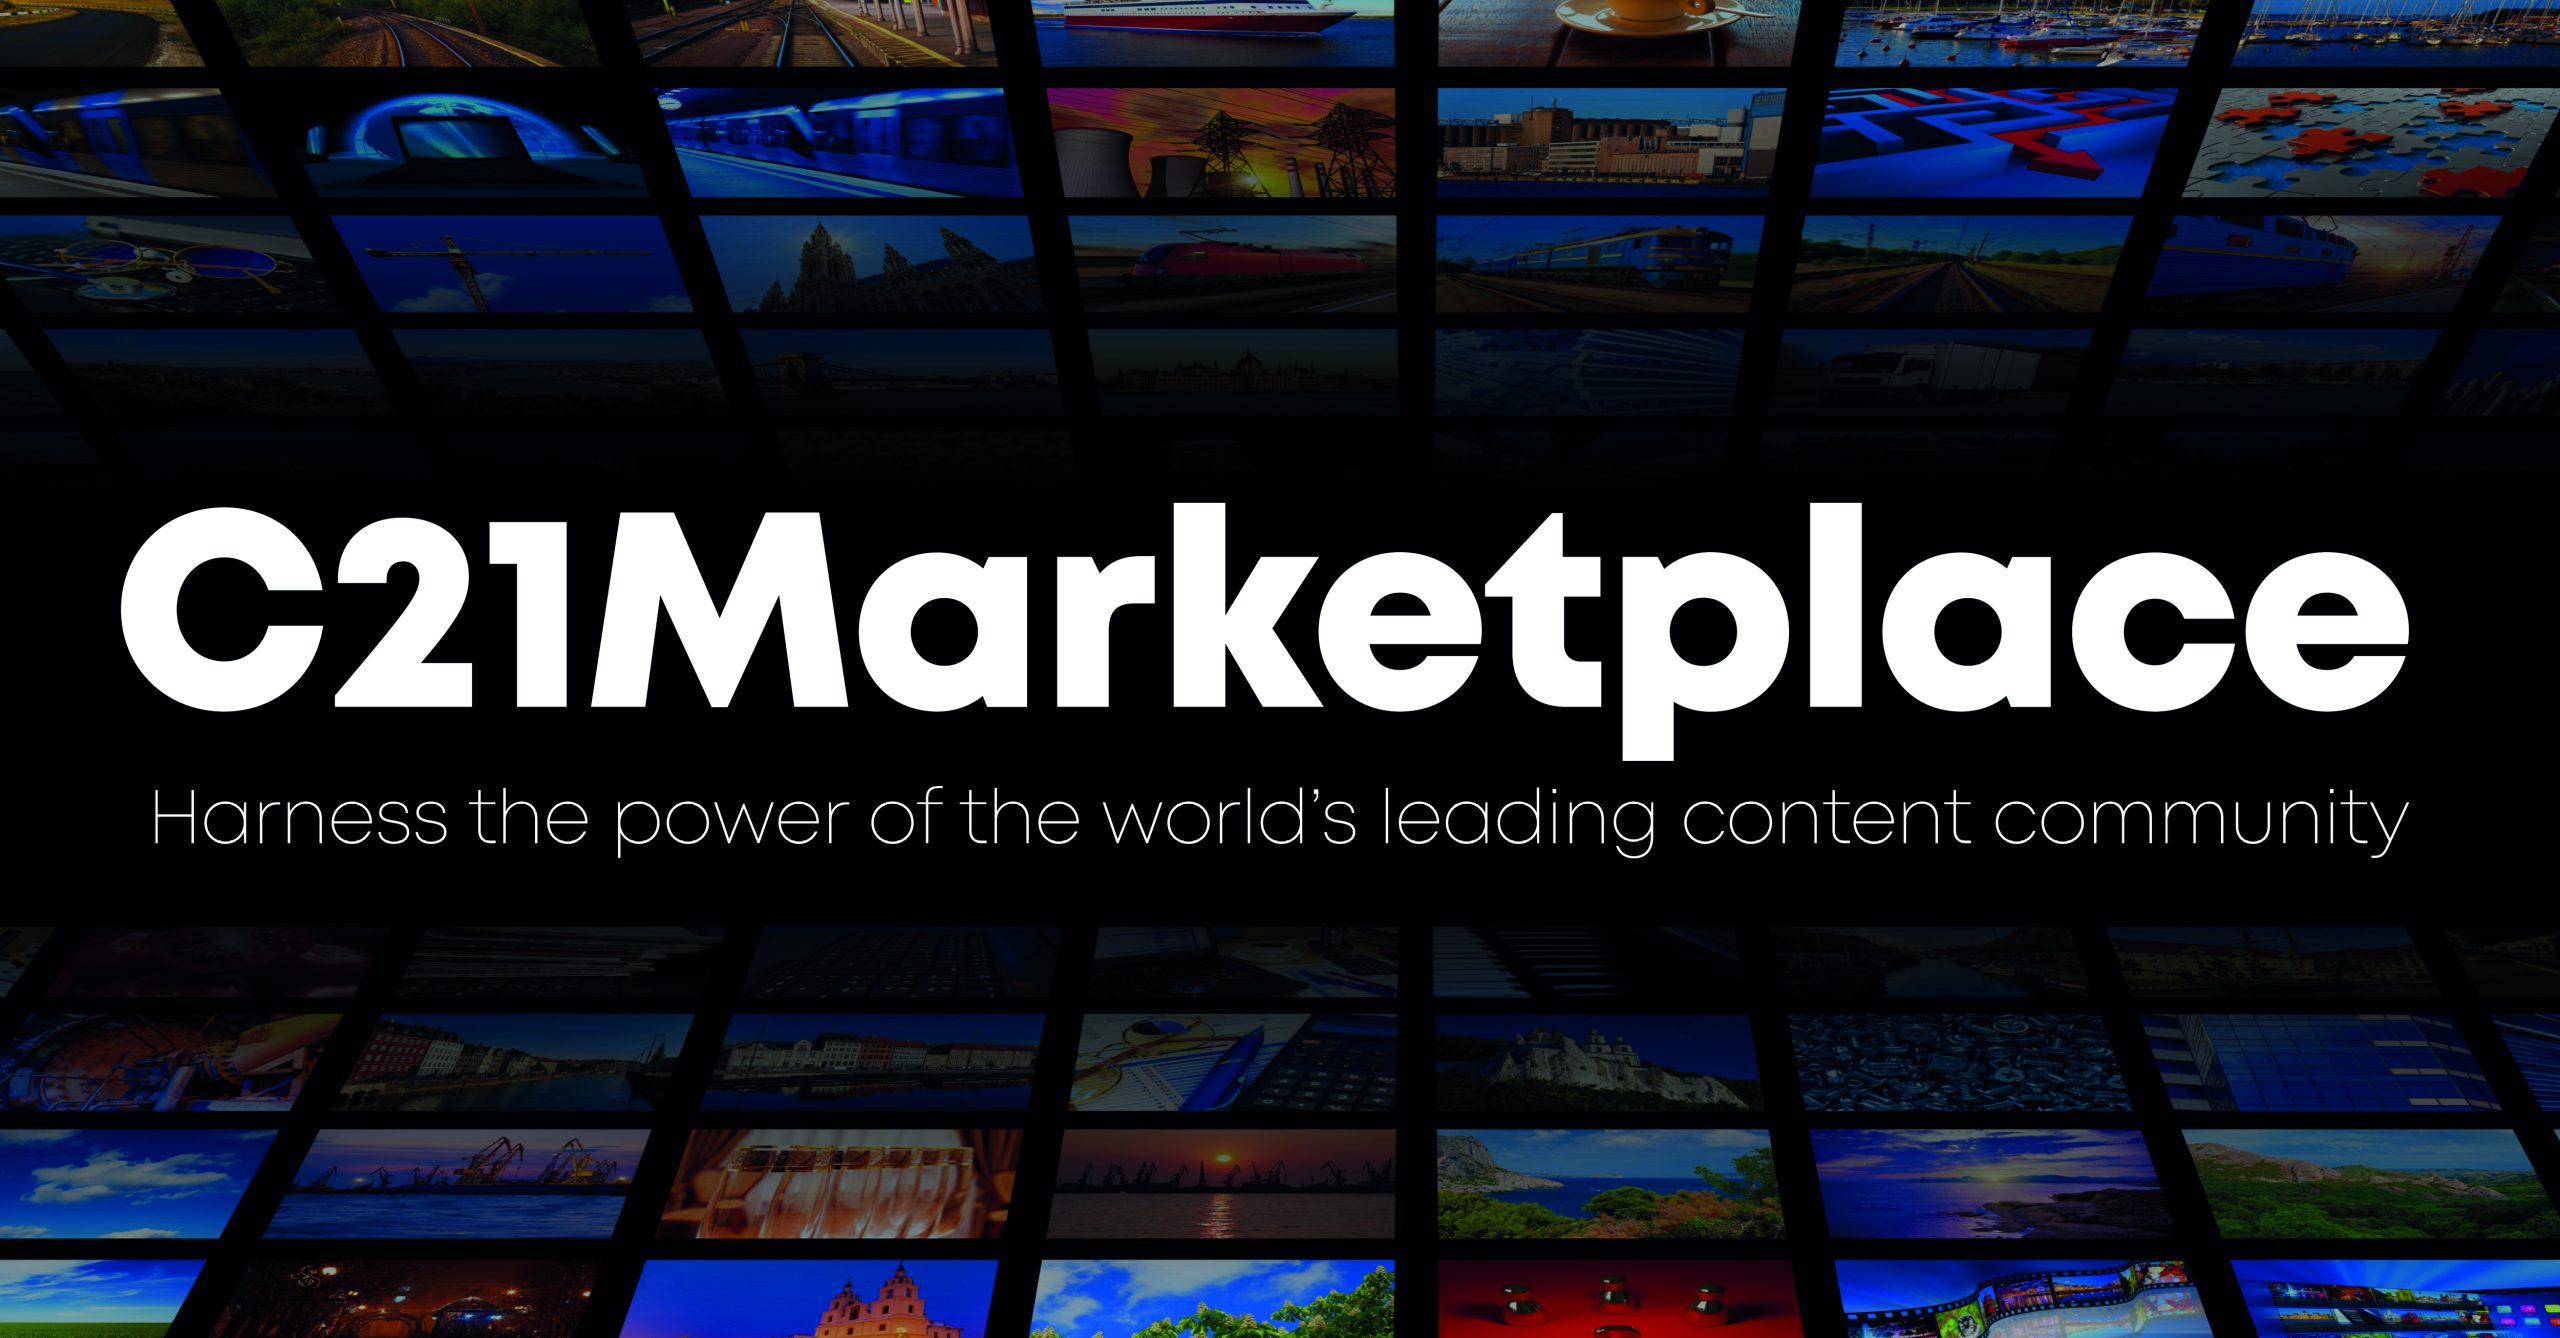 C21Marketplace launches to deliver cost-effective marketing solutions to suppliers aiming to reach the global content business | News